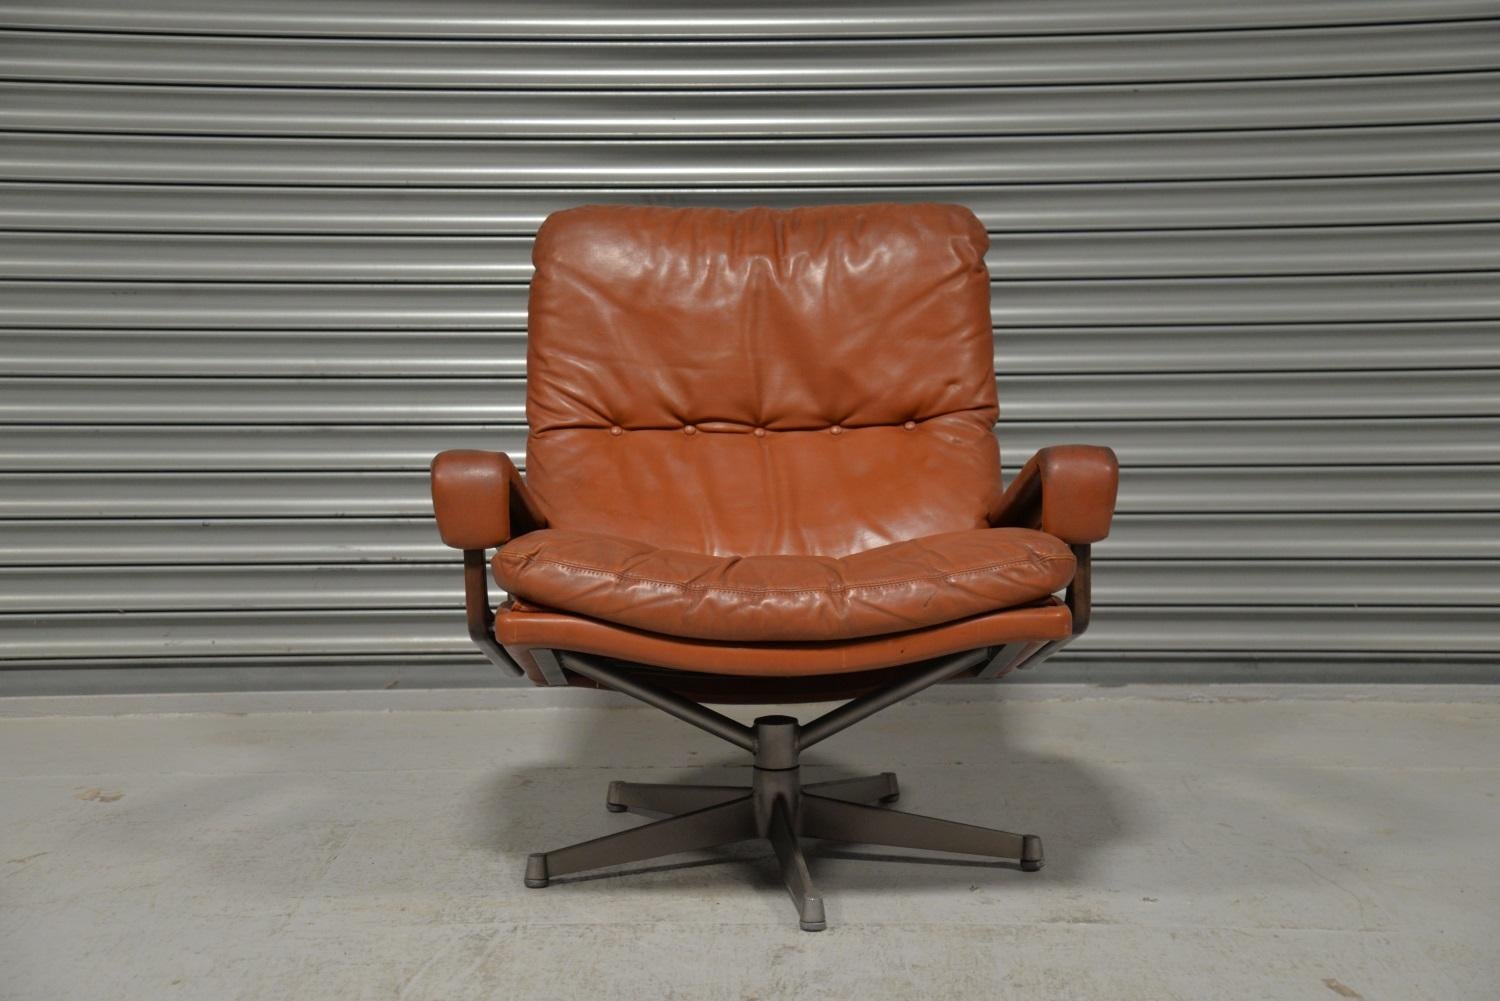 A vintage lounge King armchair by Strassle of Switzerland. Designed by Andre Vandenbeuck of Belgium, the swivel lounge armchair is upholstered in stunning tan leather. Hand built in Switzerland to incredibly high standards, the armchair has rosewood